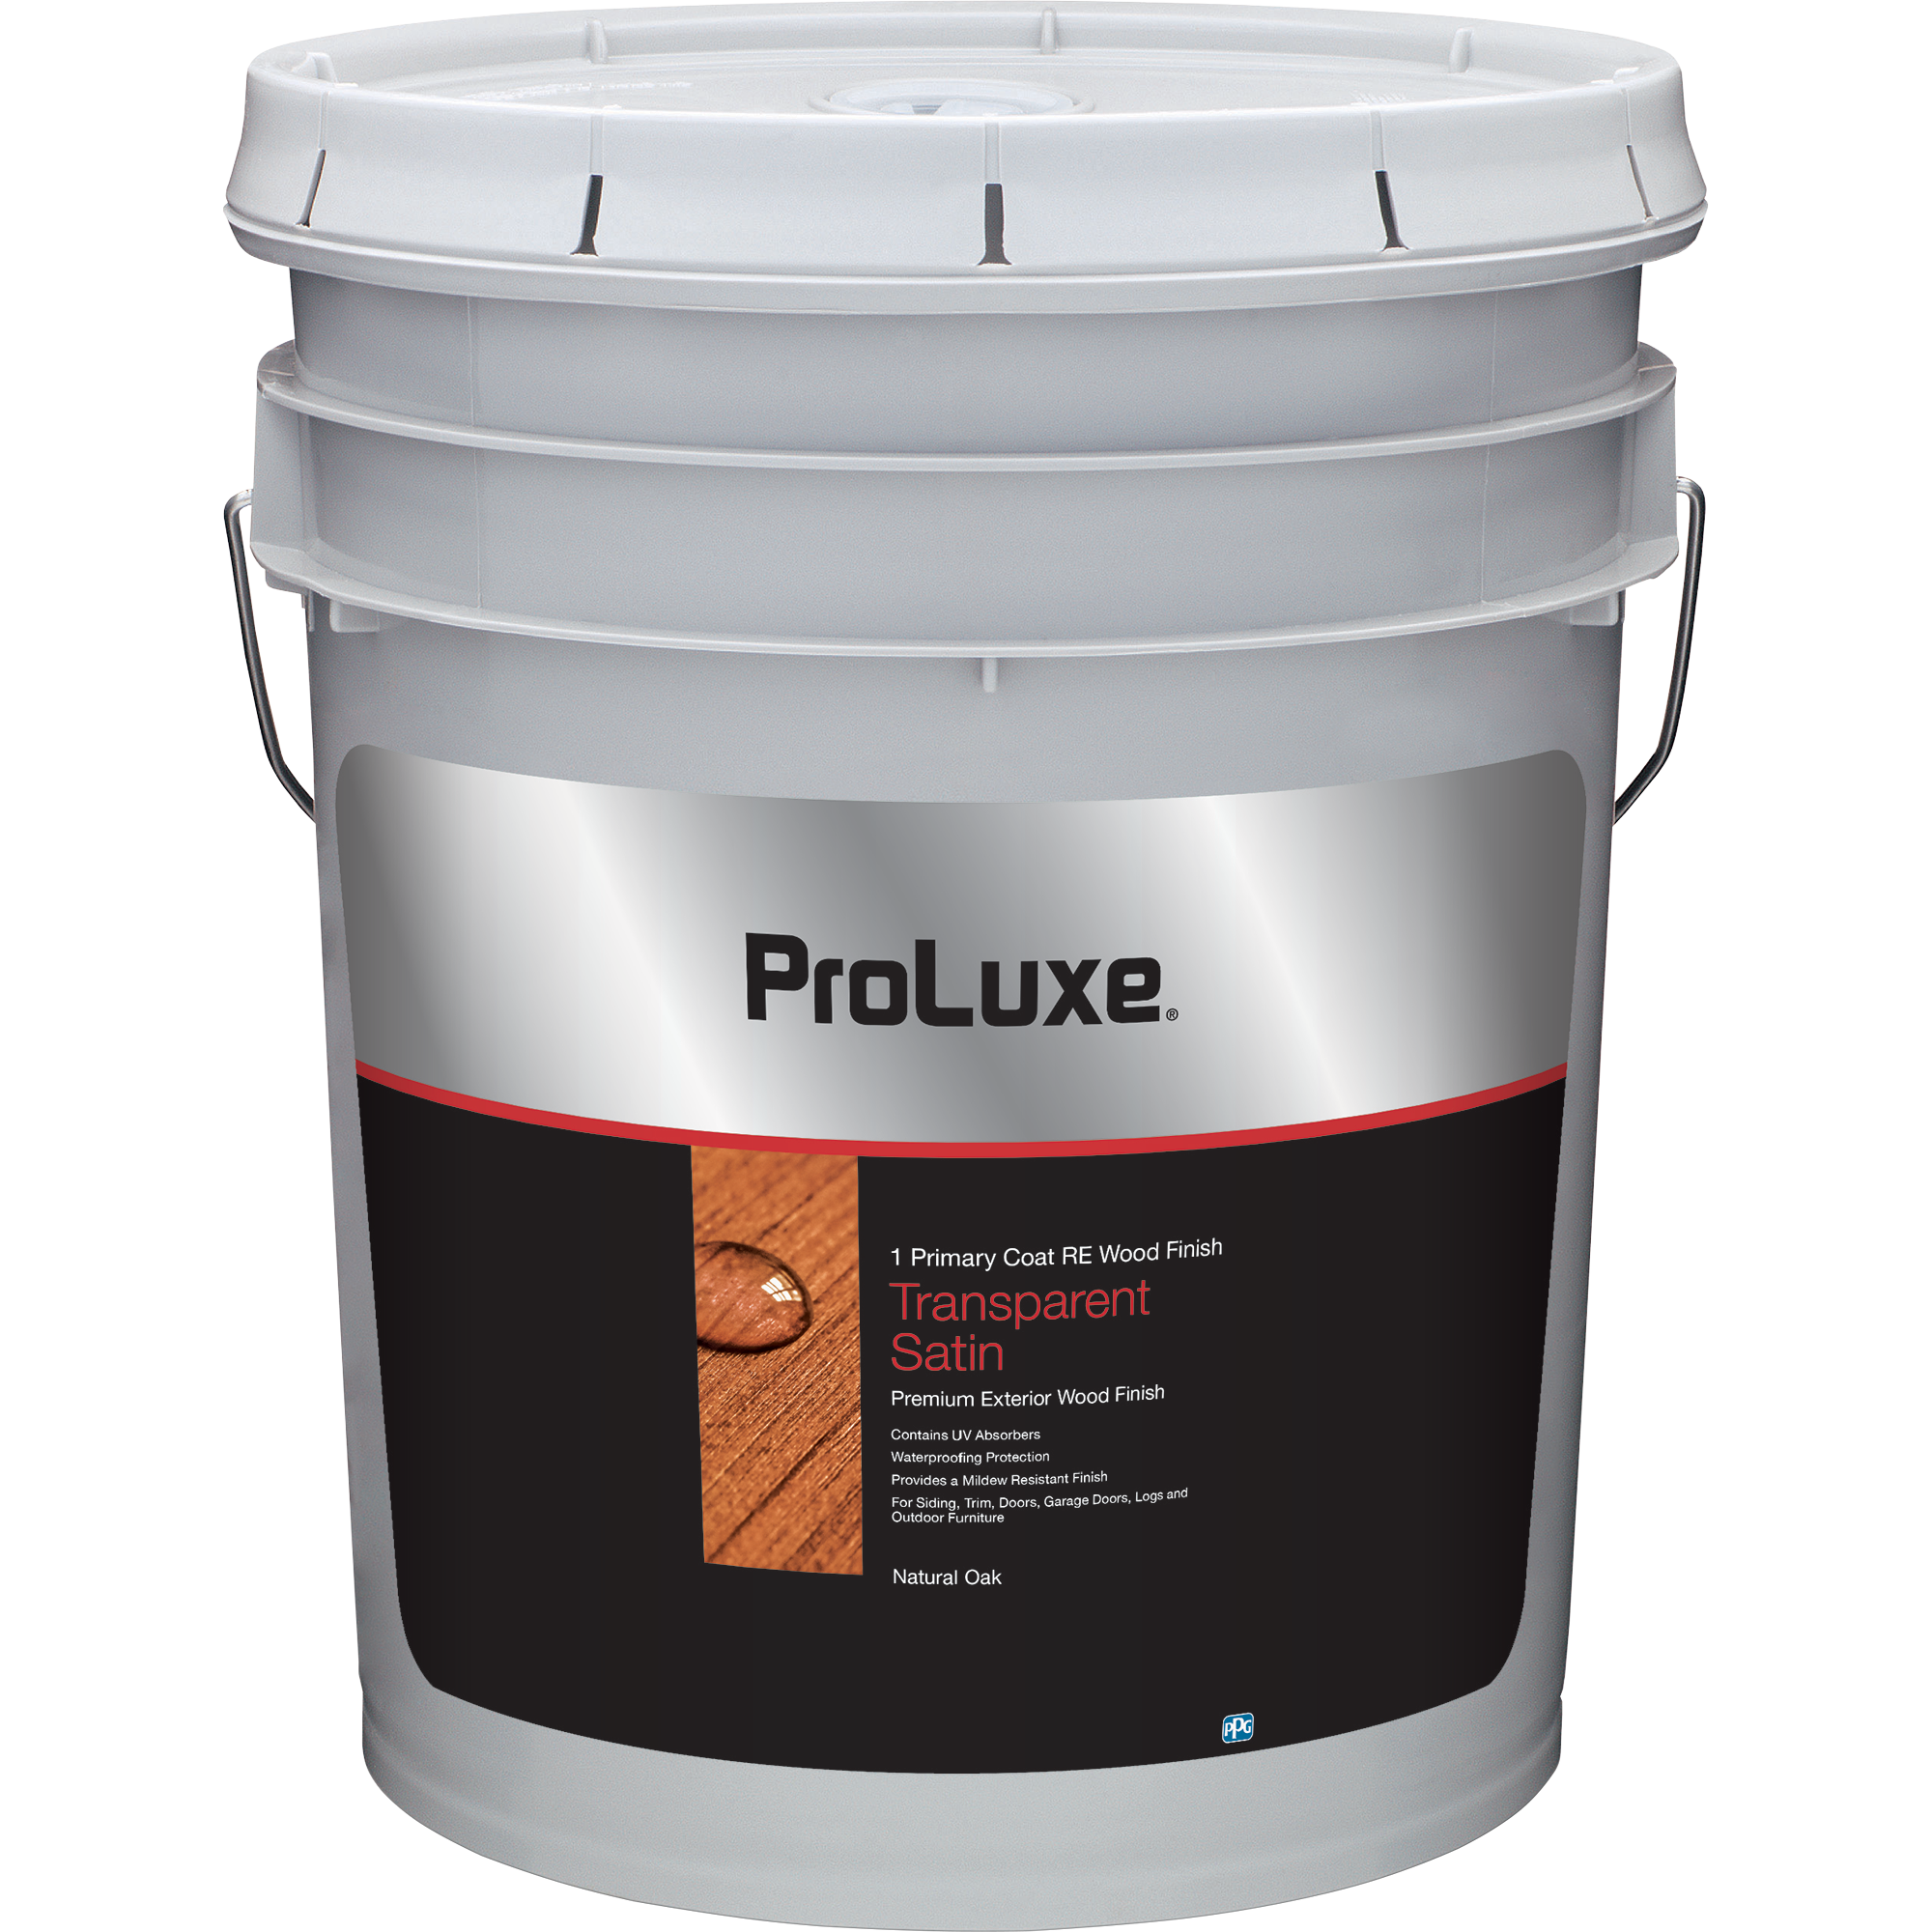  PROLUXE<sup>®</sup> 1 Primary Coat RE Wood Finish 5 Gallon